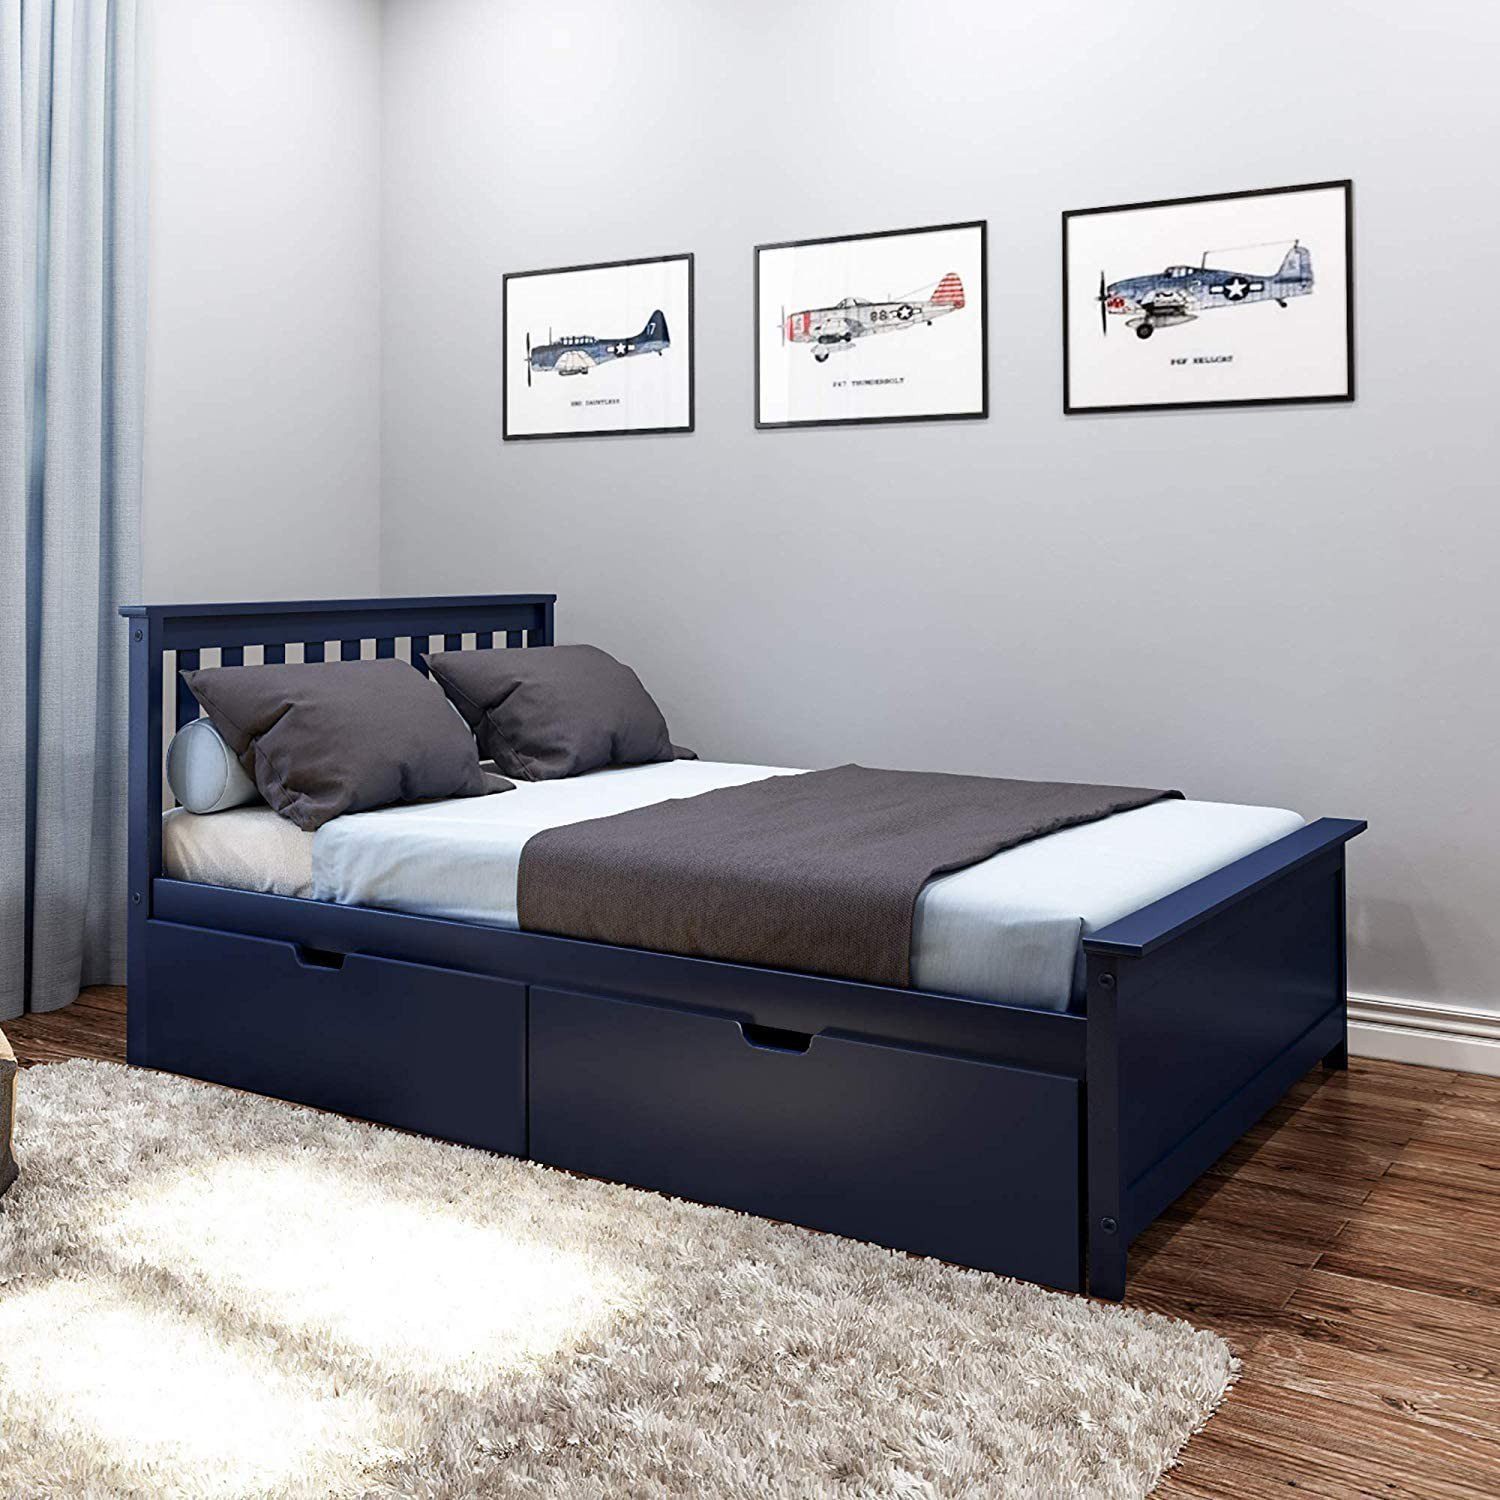 SOLID WOOD FULL SIZE PLATFORM BED IN BLUE FINISH WITH STORAGE